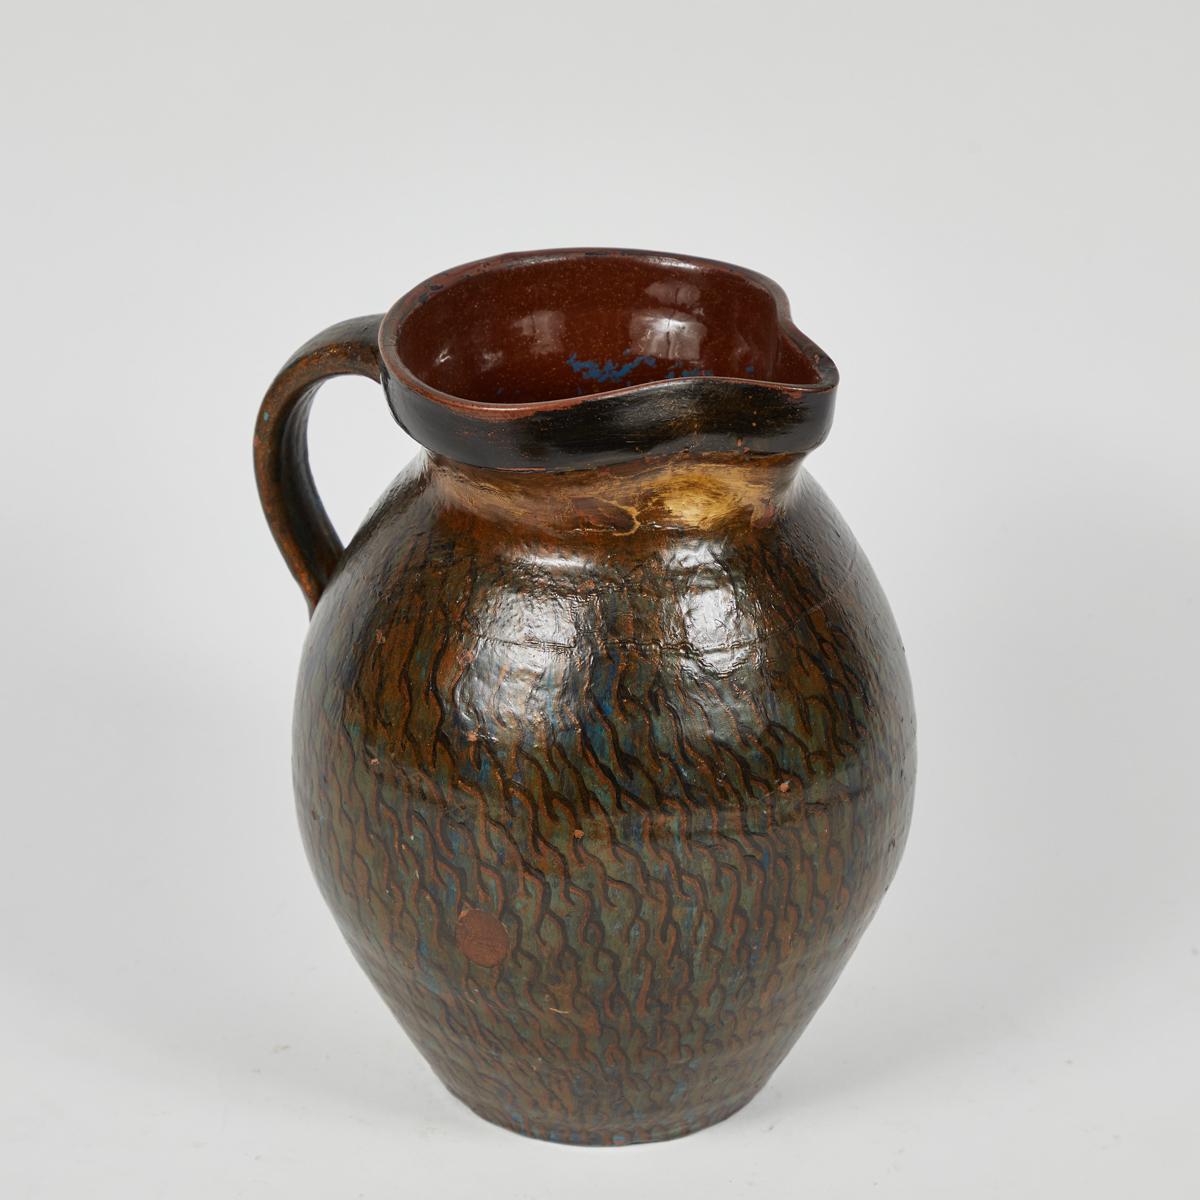 Early 20th century Hurlington Ware pitcher with teal and bronze painted detail.